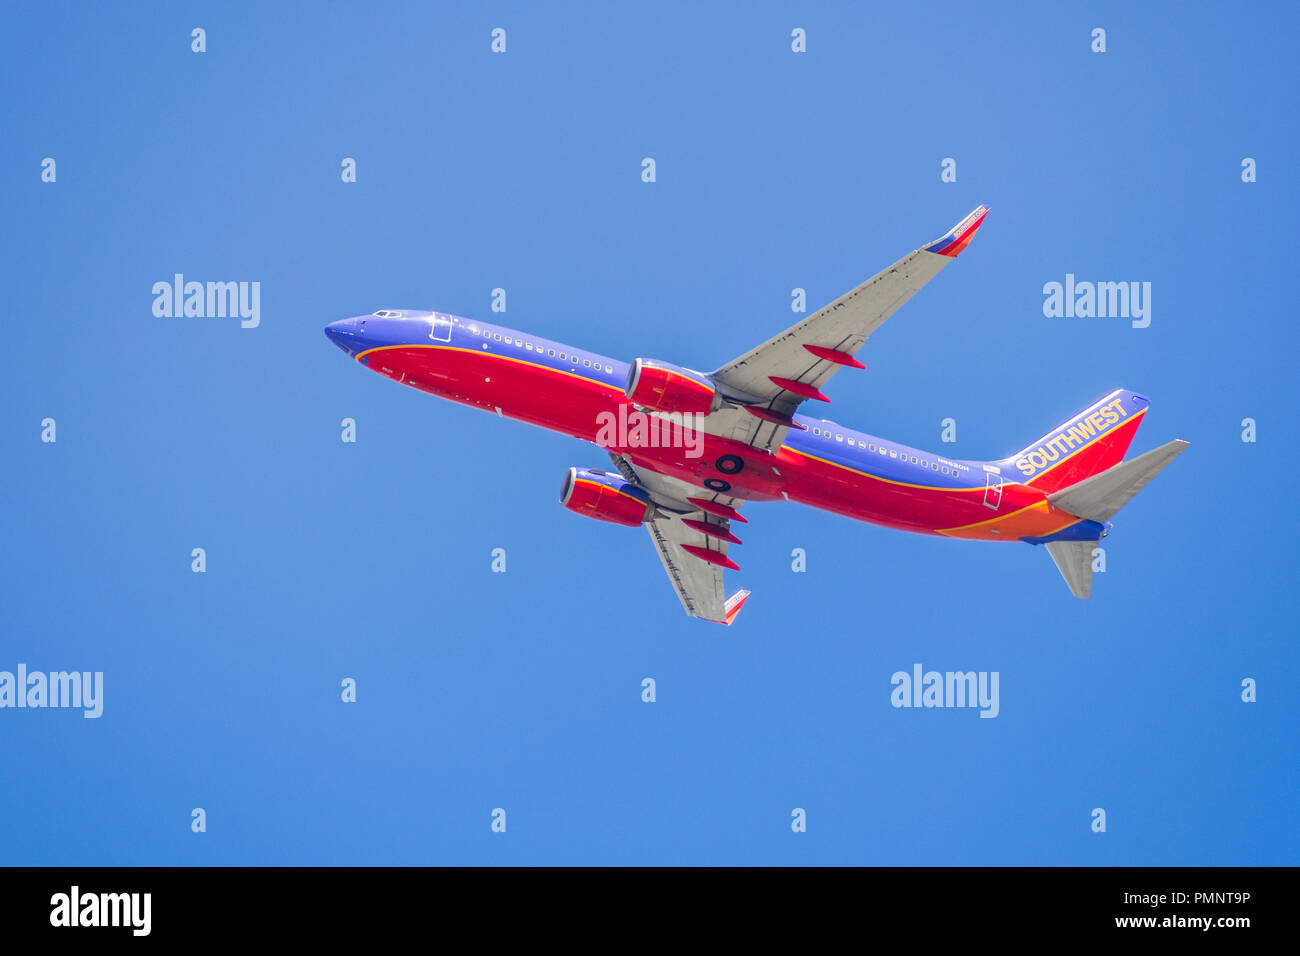 May 3, 2018 Santa Clara / CA / USA - Southwest Airlines aircraft up in the air after taking off from Norman Y. Mineta San Jose International Airport Stock Photo